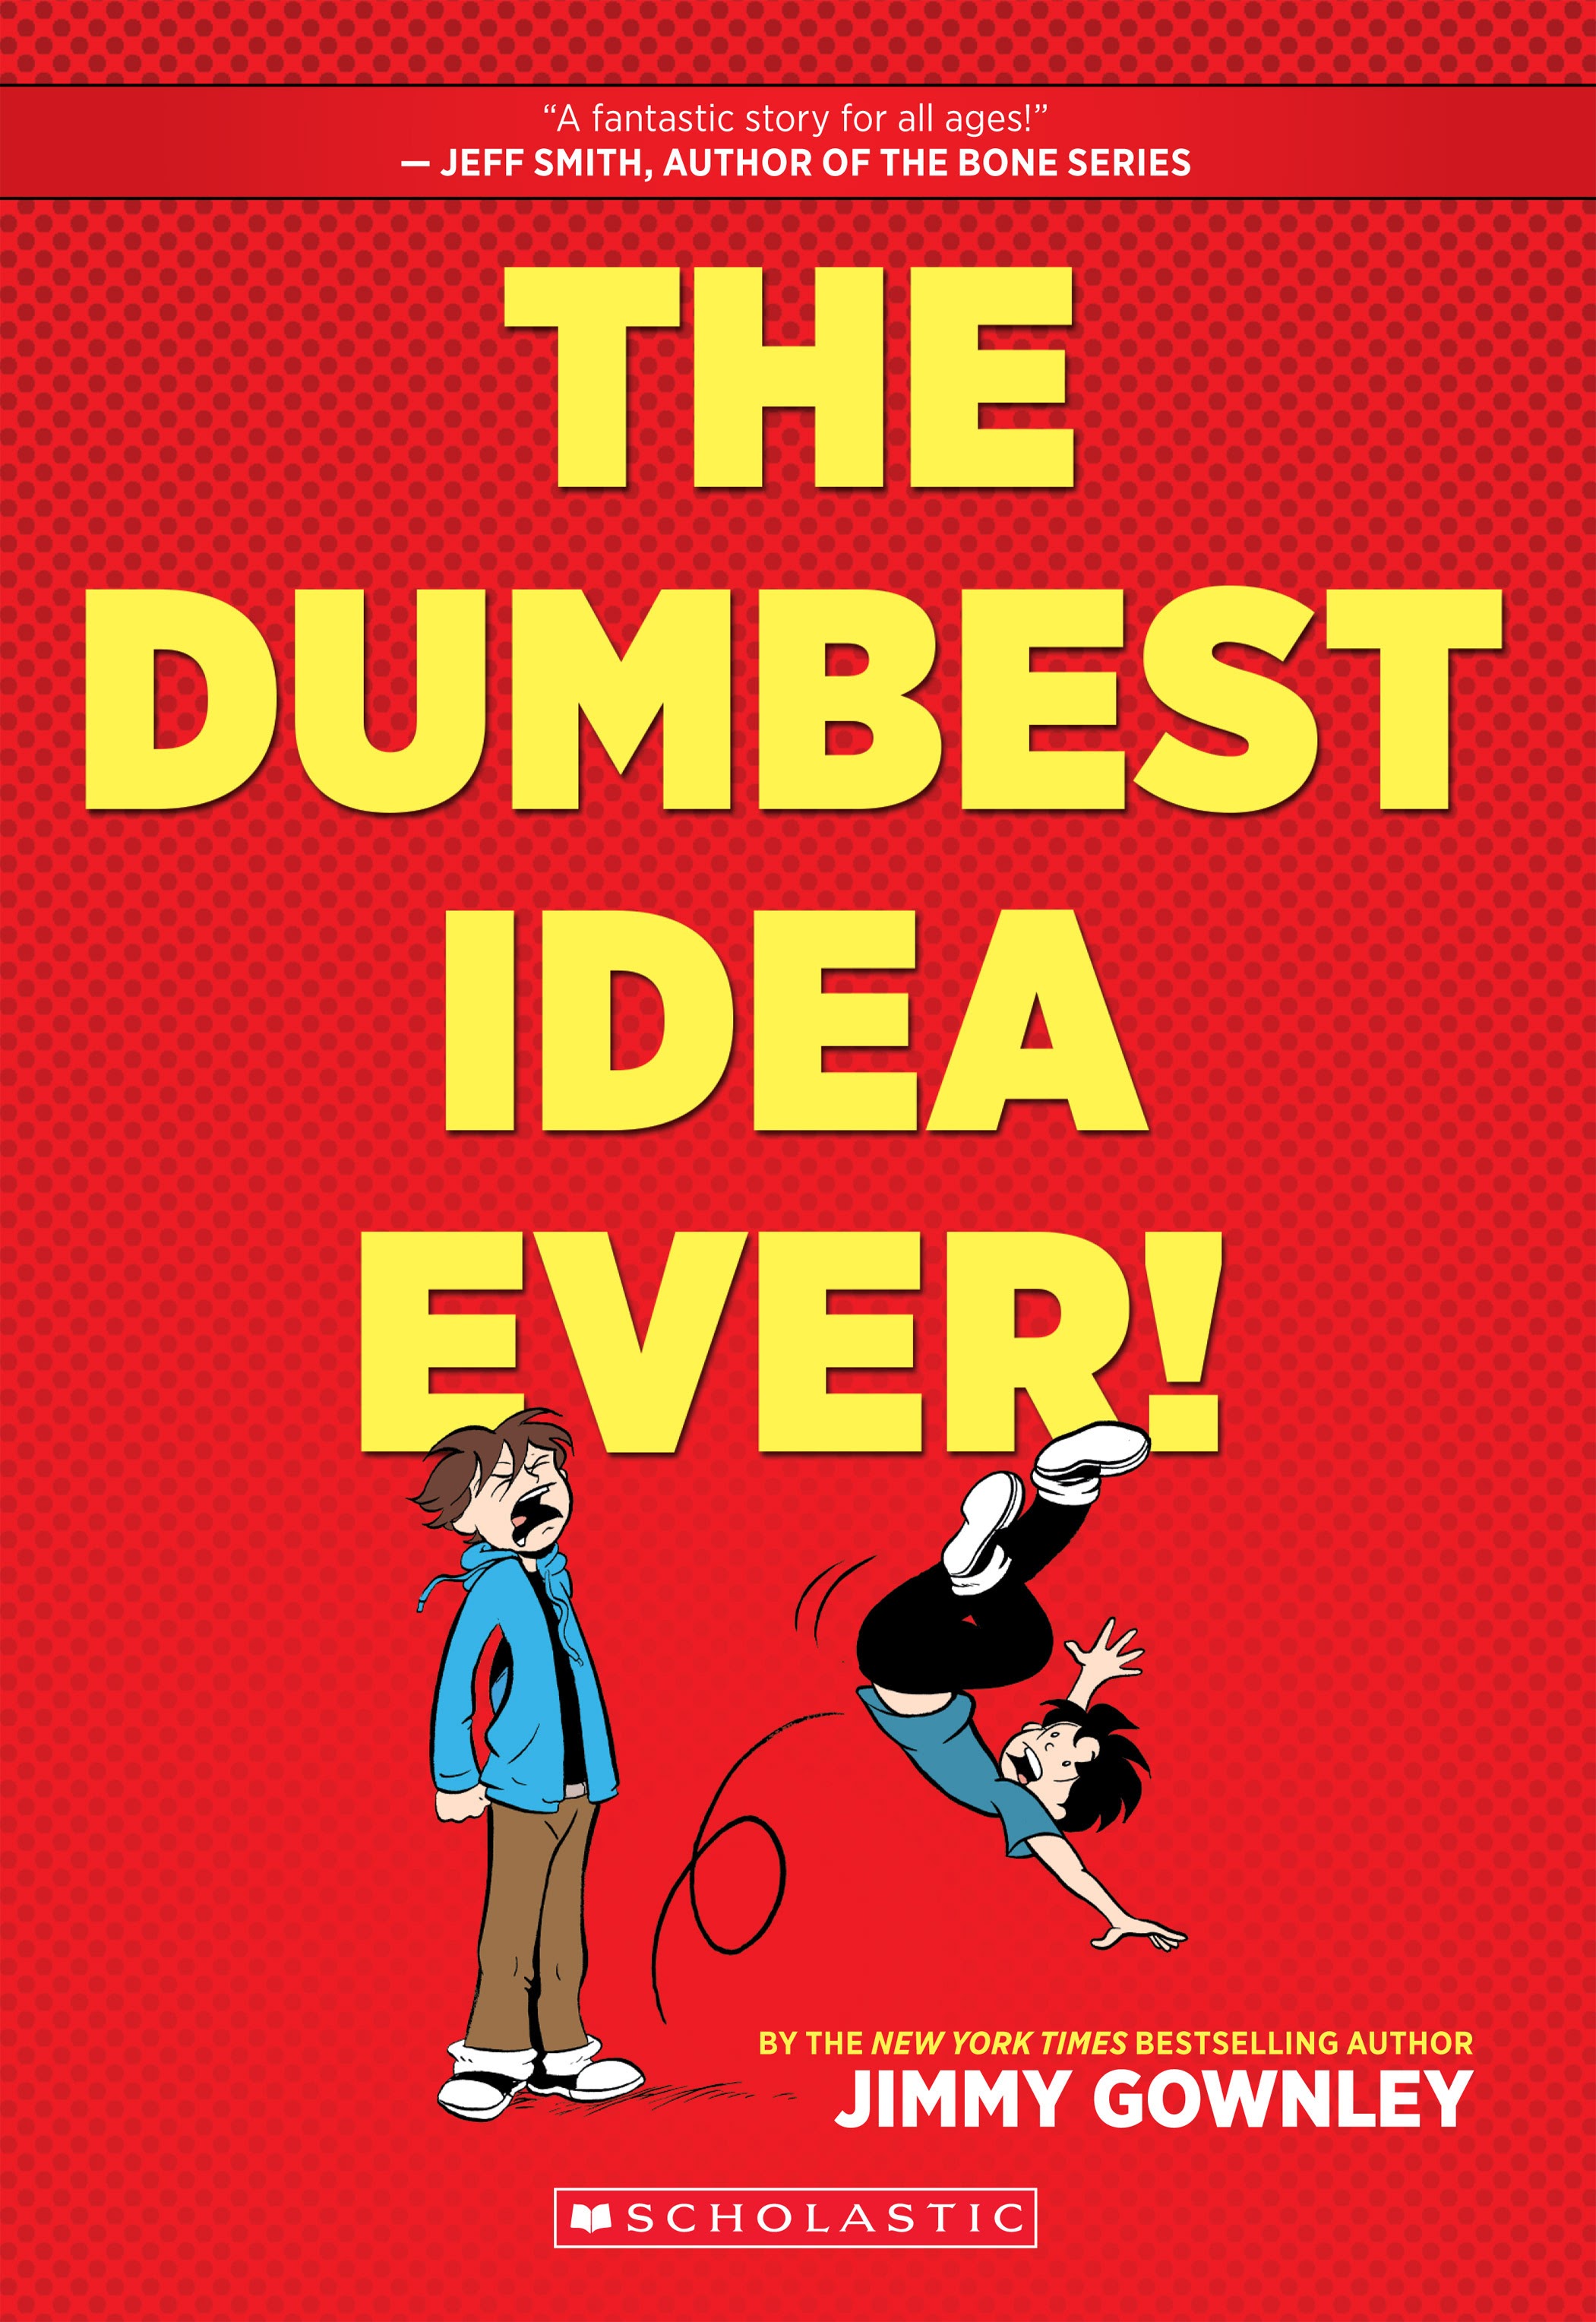 Read online The Dumbest Idea Ever! comic -  Issue # TPB (Part 1) - 1